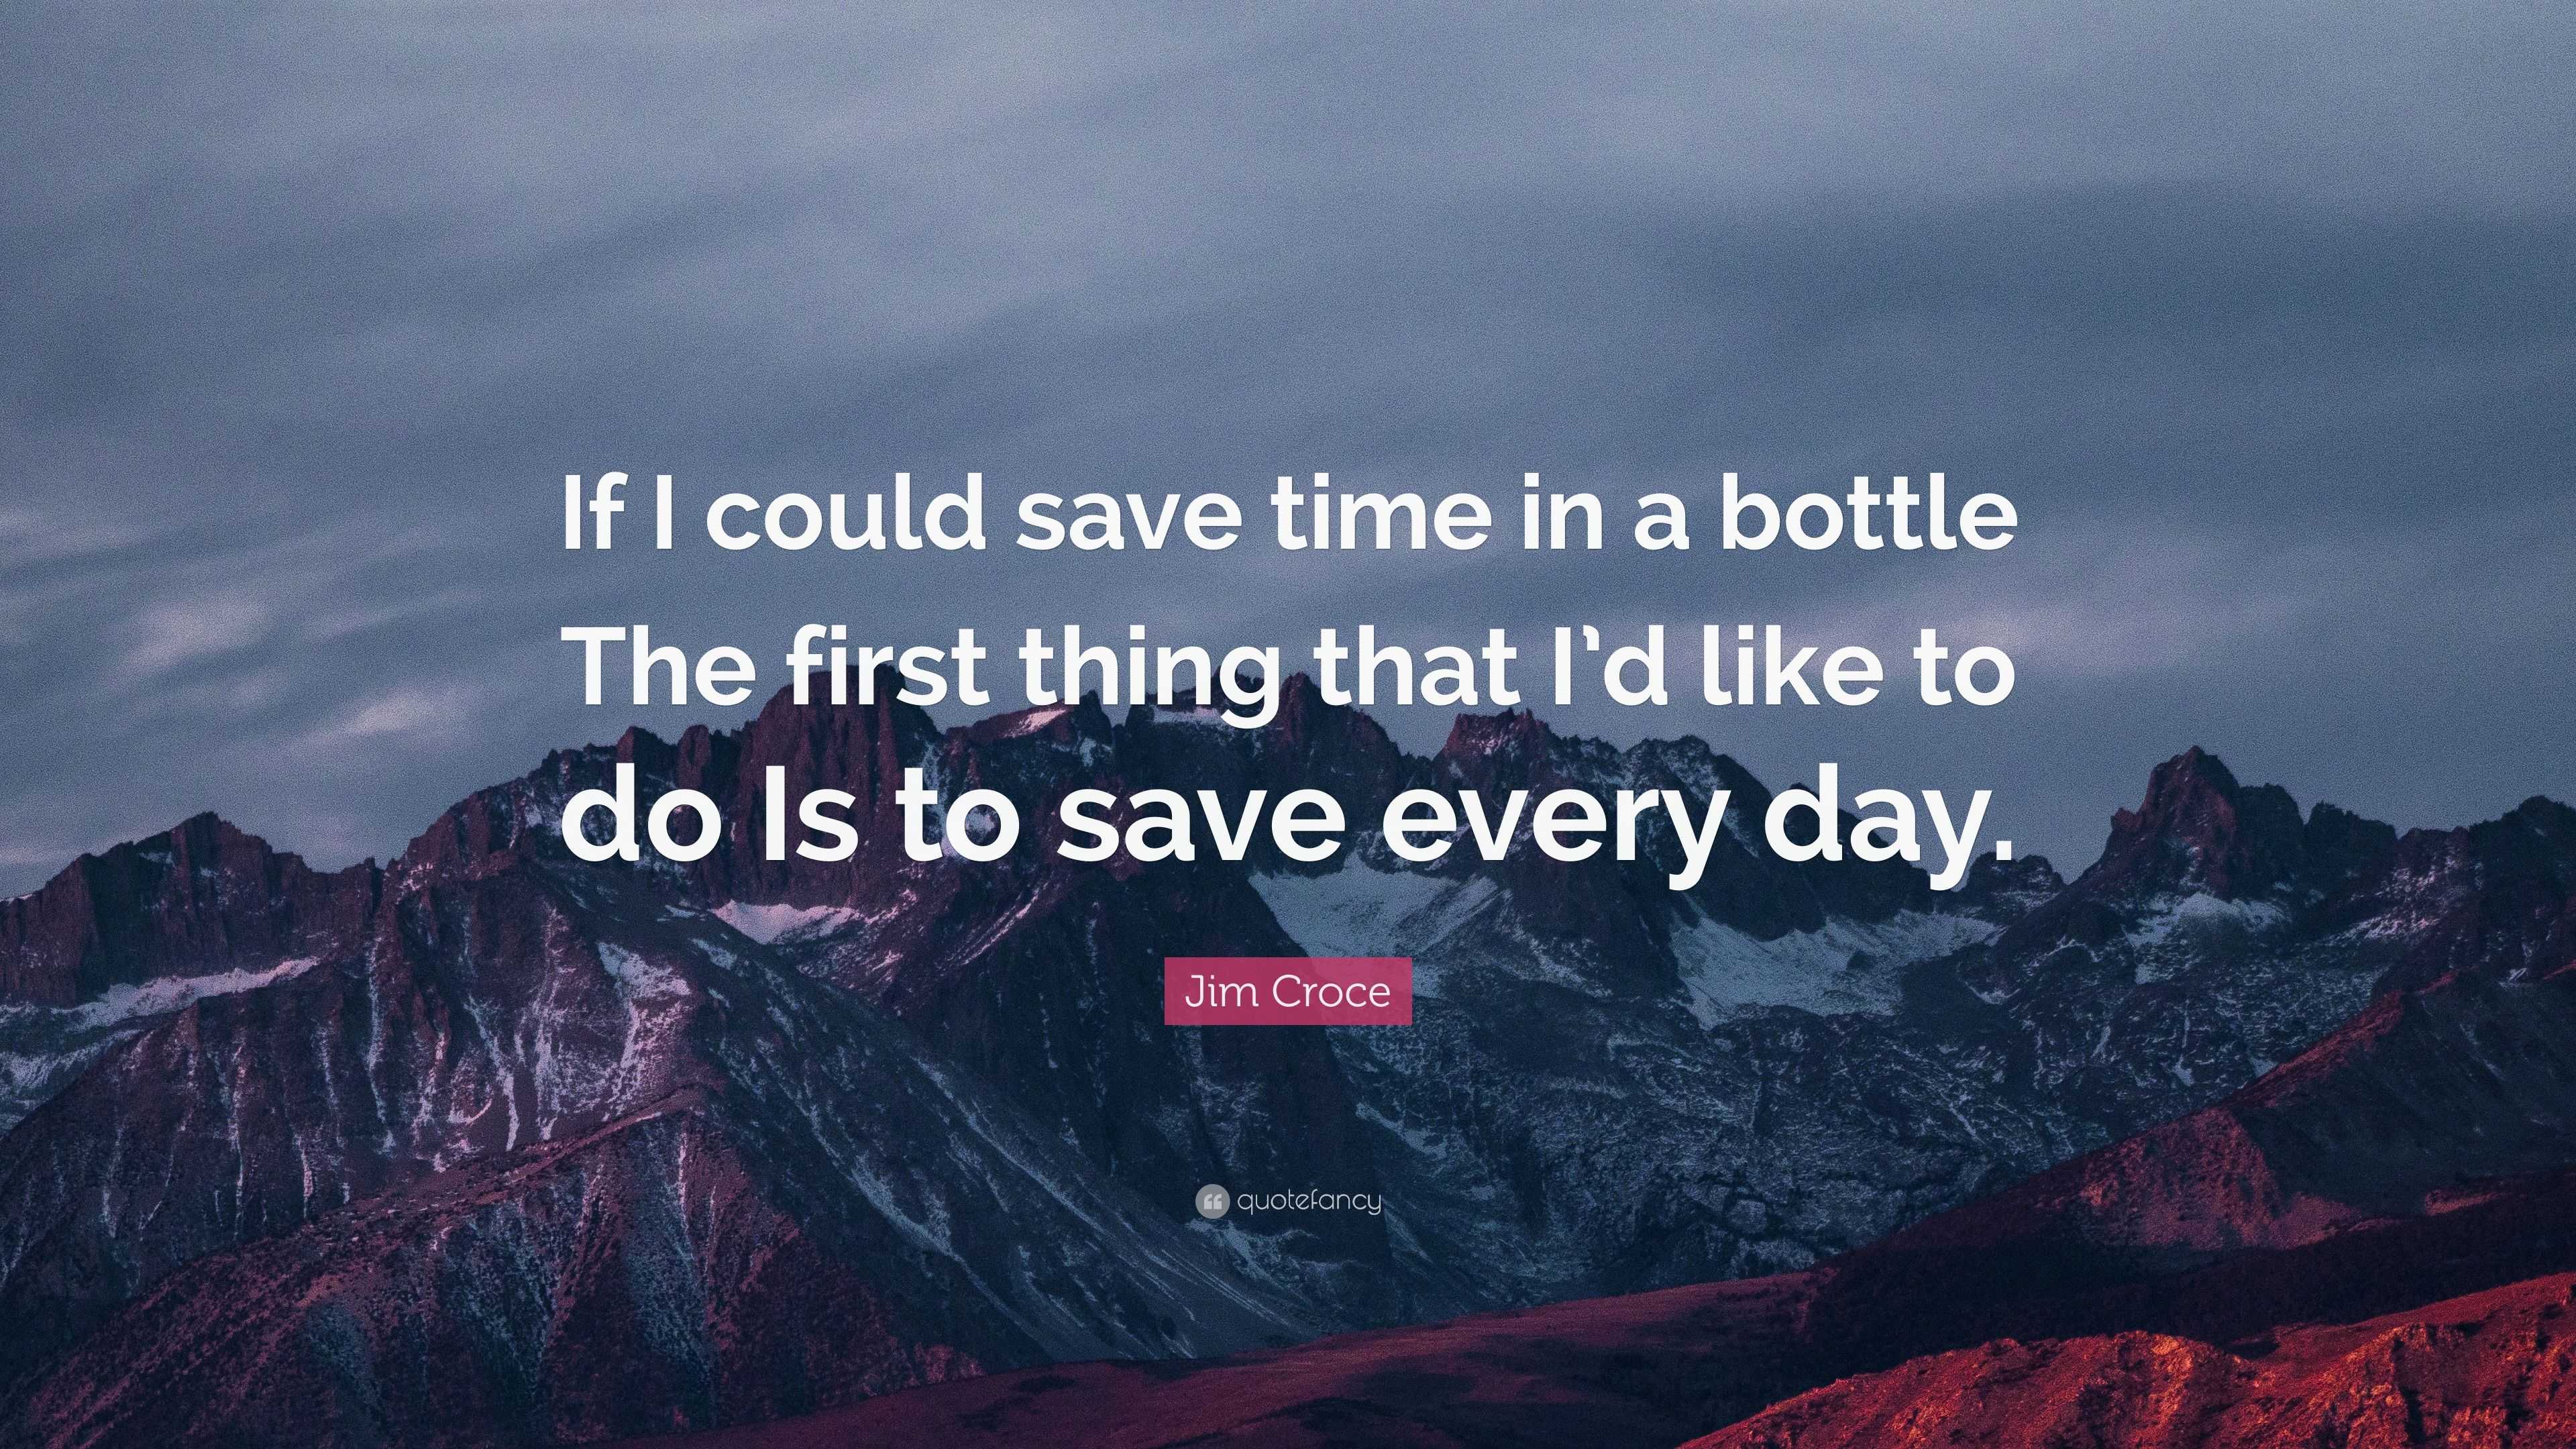 ketting Meerdere Dwars zitten Jim Croce Quote: “If I could save time in a bottle The first thing that I'